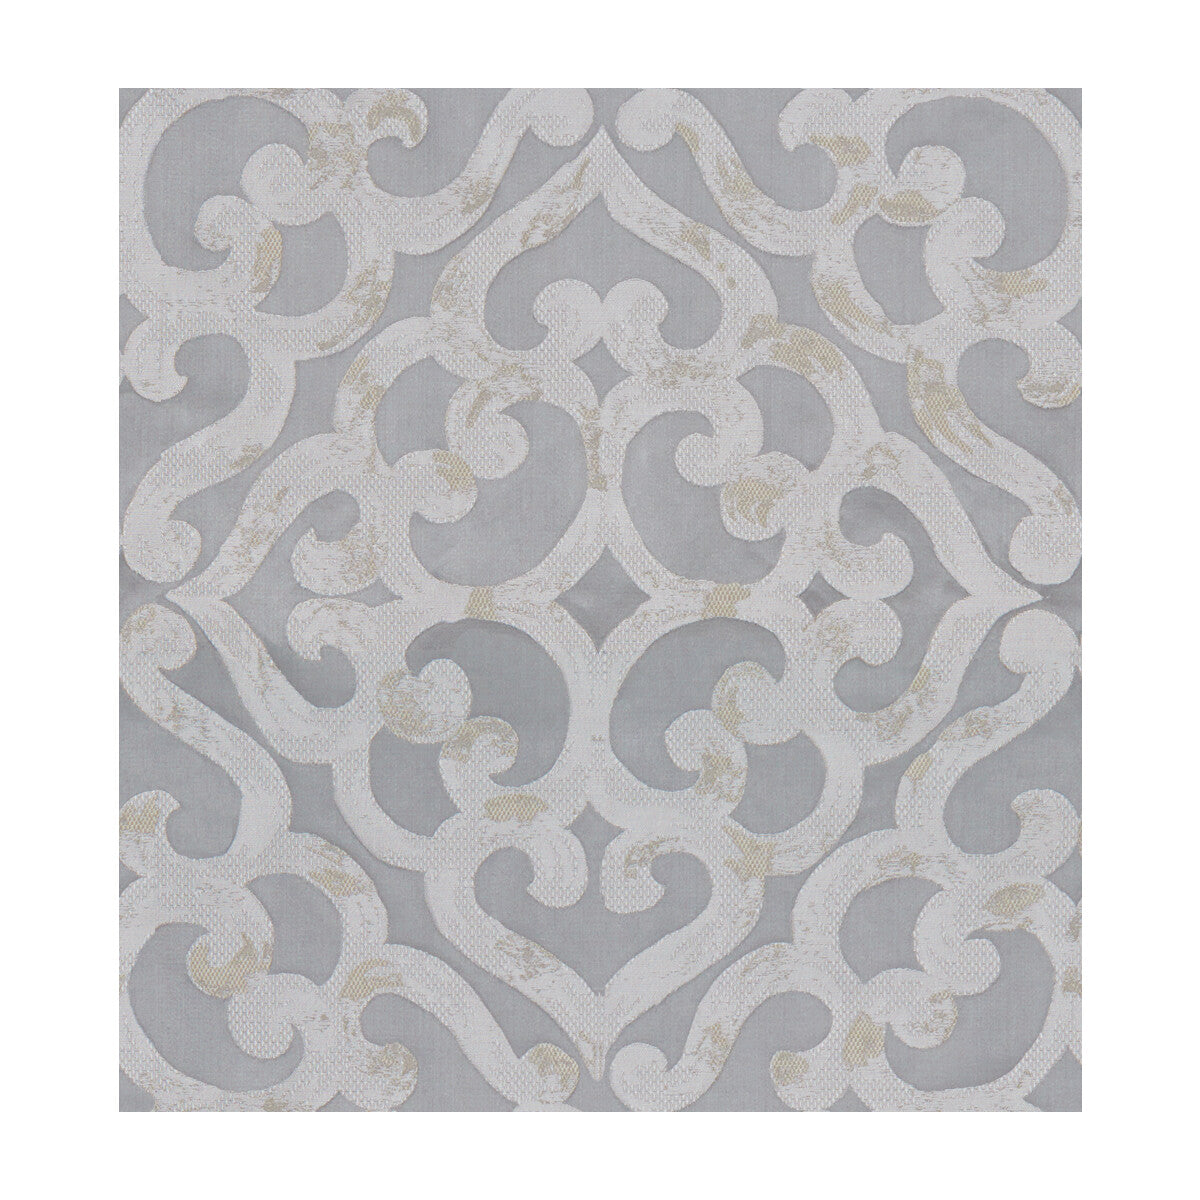 Kurrajong fabric in silver color - pattern 33799.106.0 - by Kravet Design in the Candice Olson collection